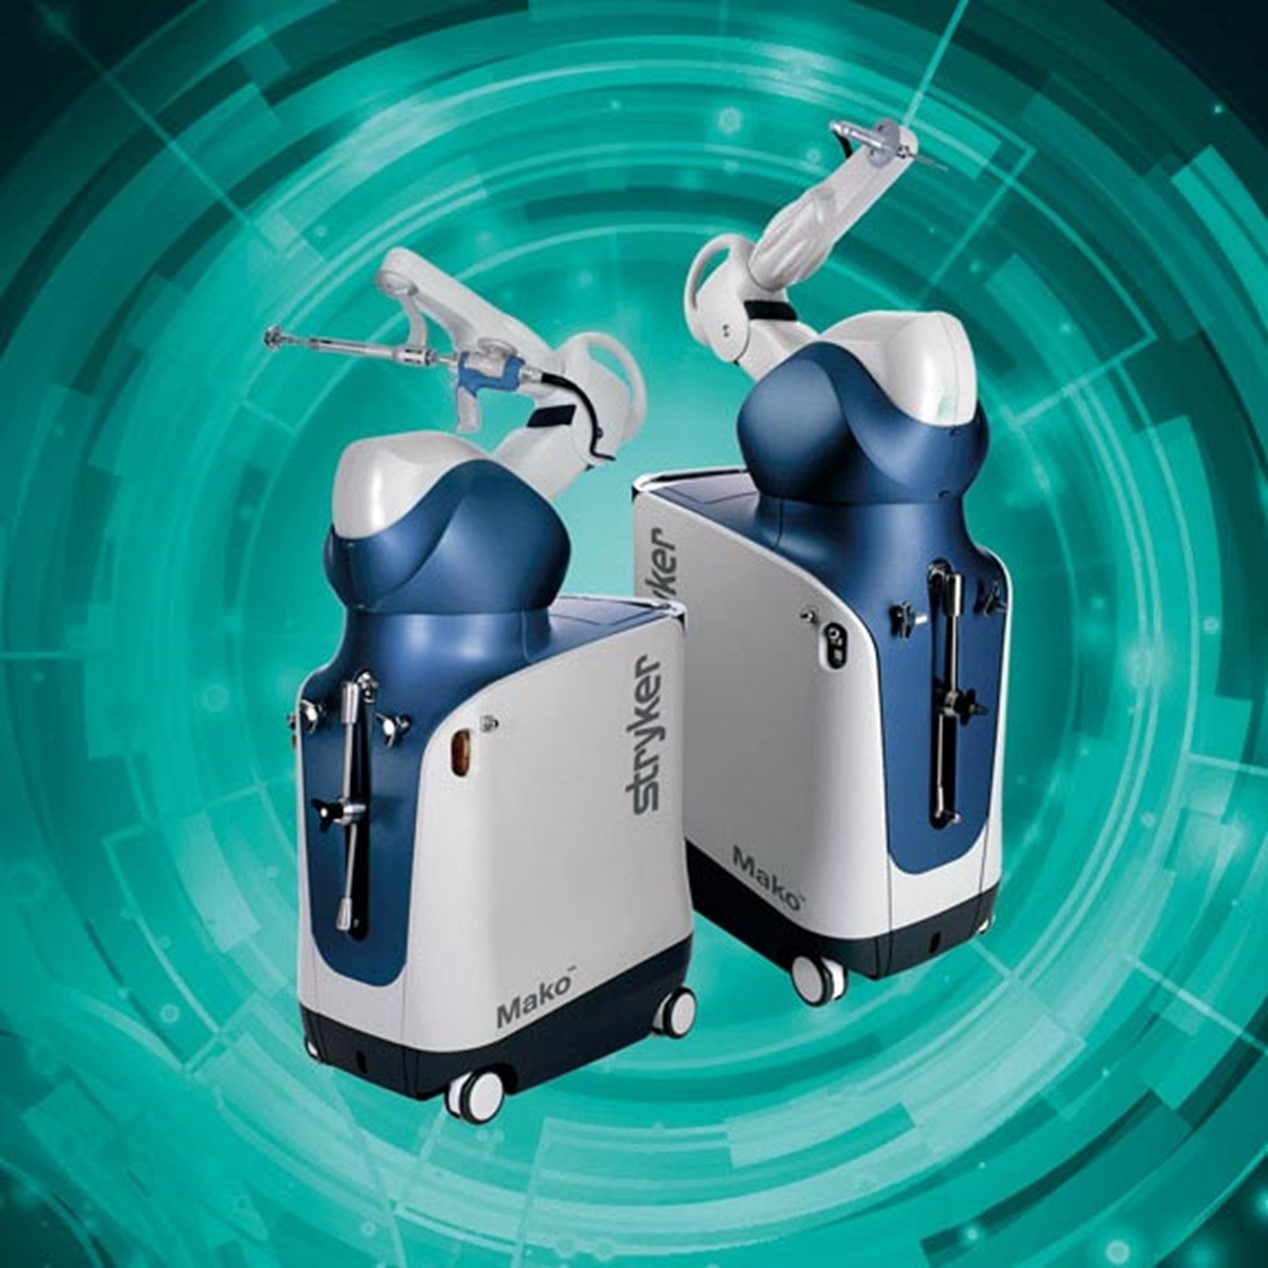 Spire Manchester is number one in the UK for Mako robotic surgery